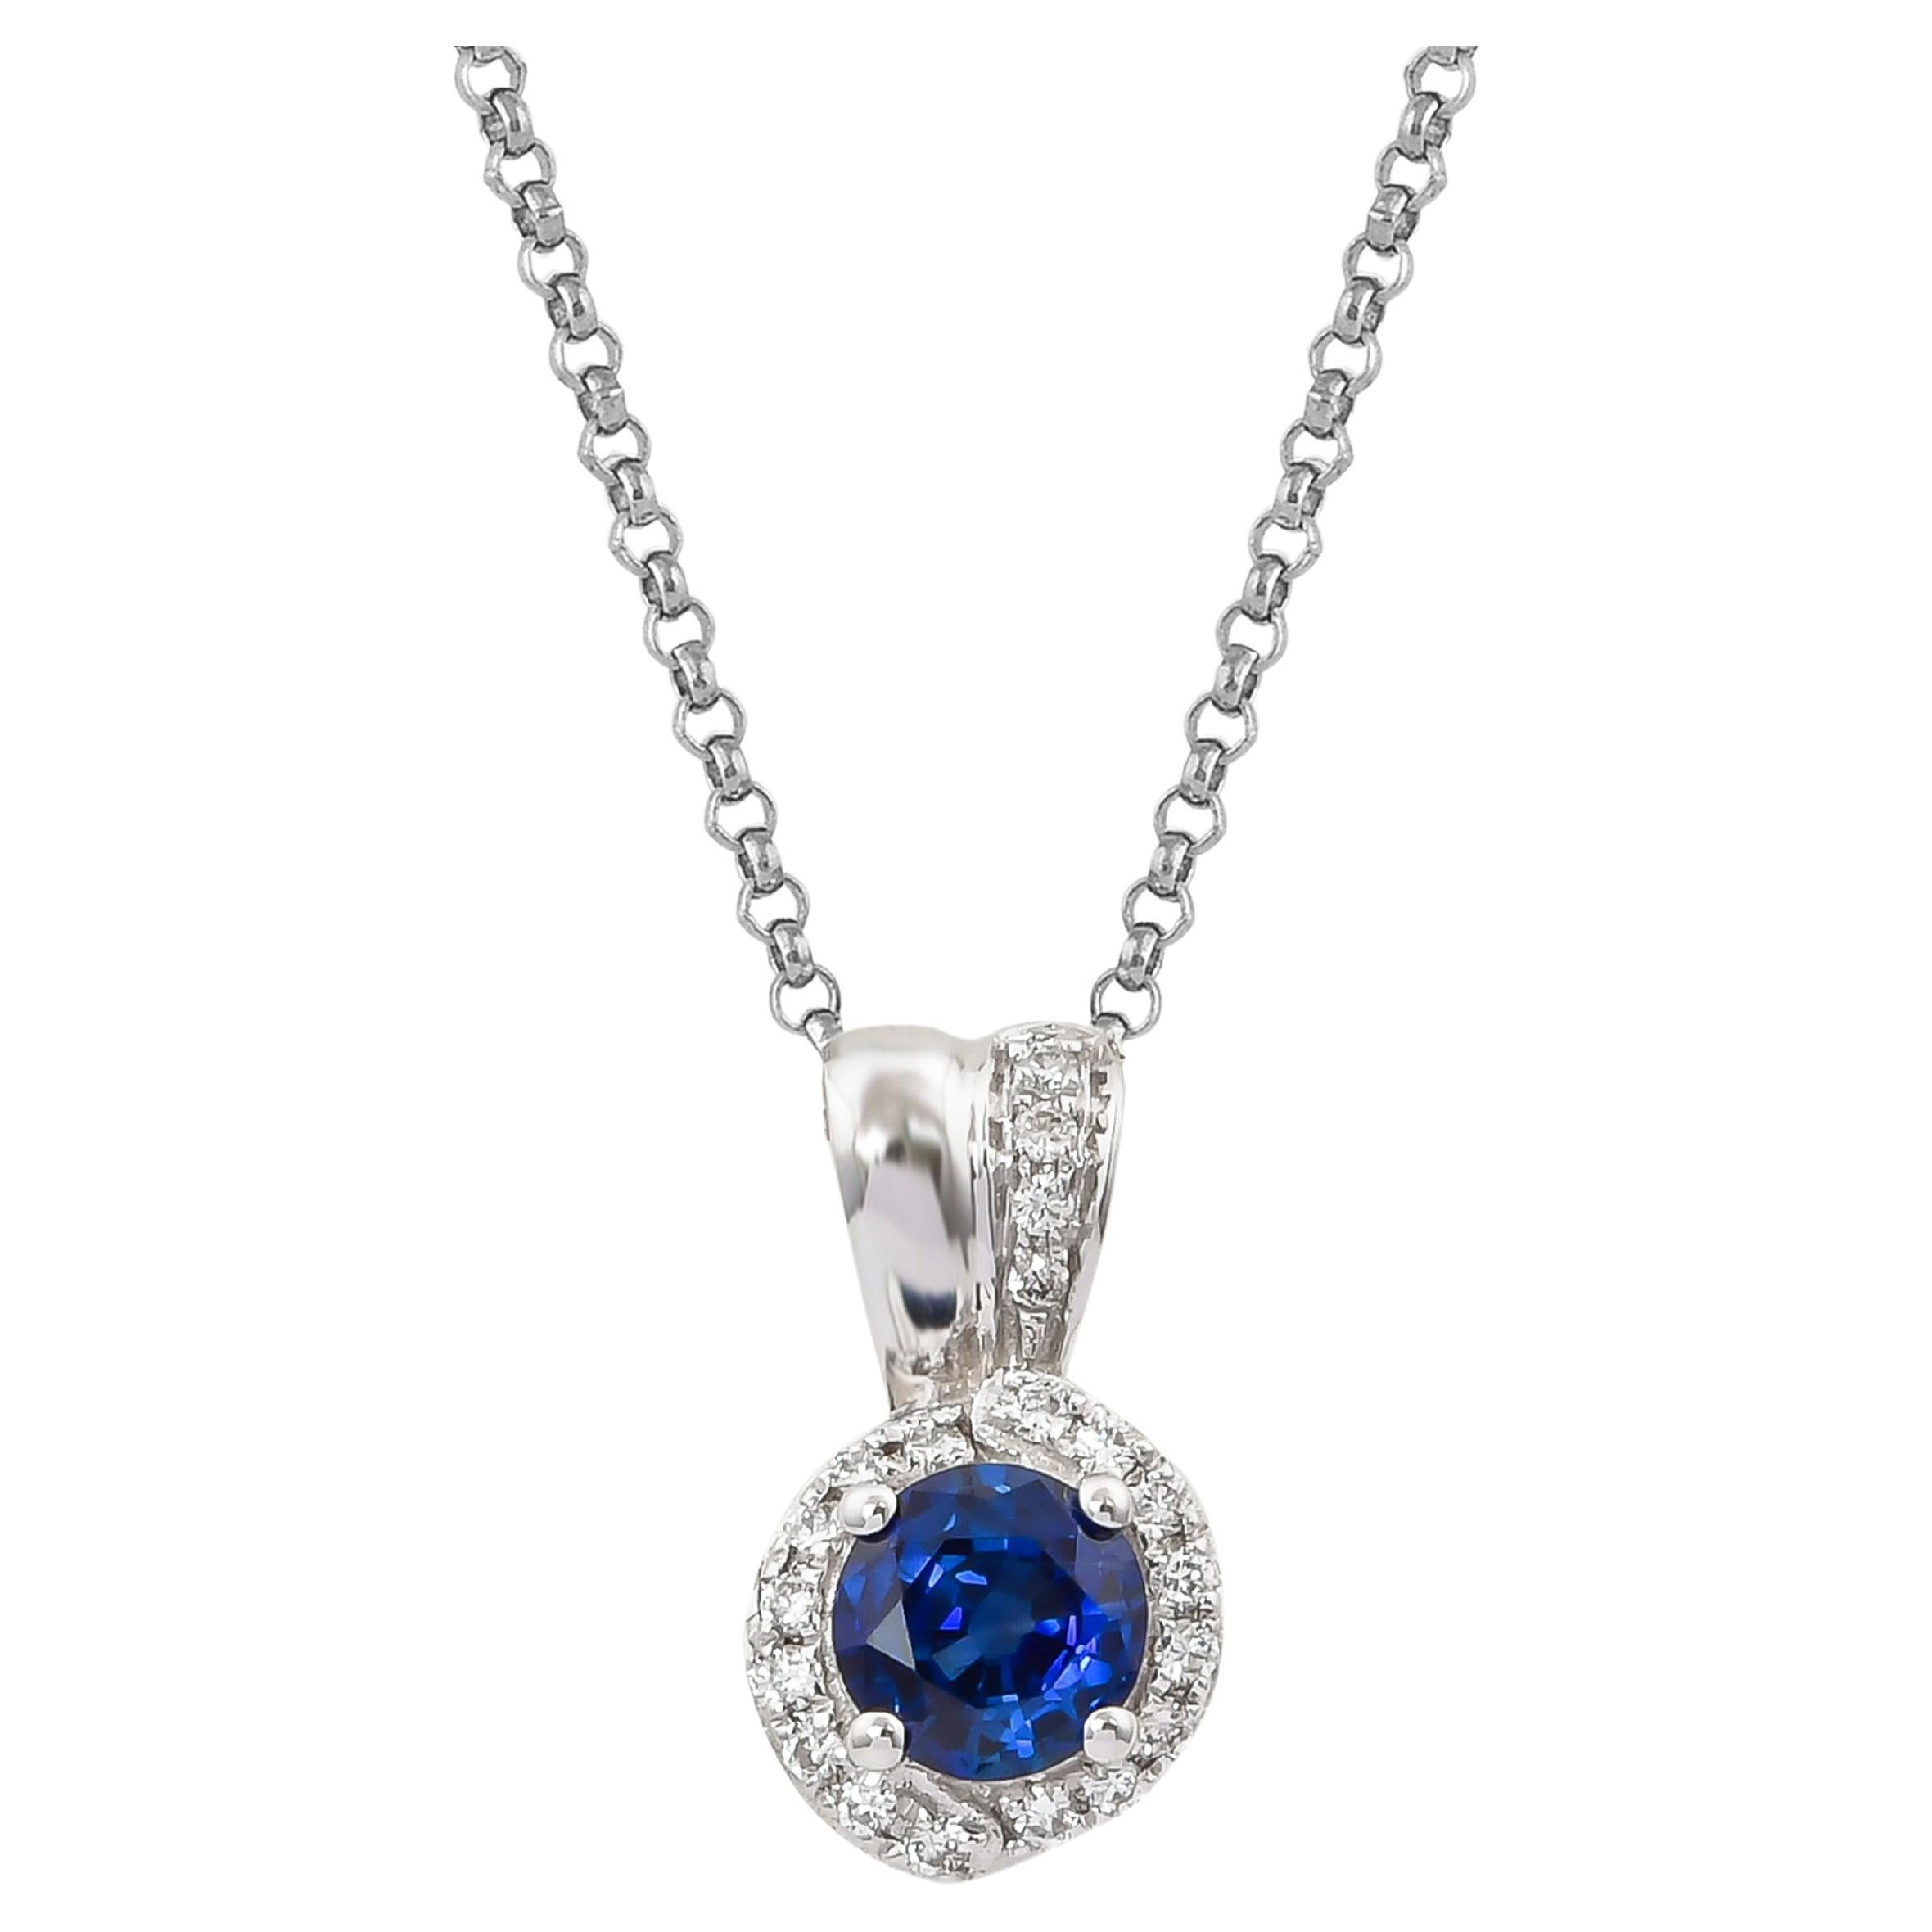 0.4 Carat Blue Sapphire and Diamond Pendant with Chain in 18 Karat White Gold